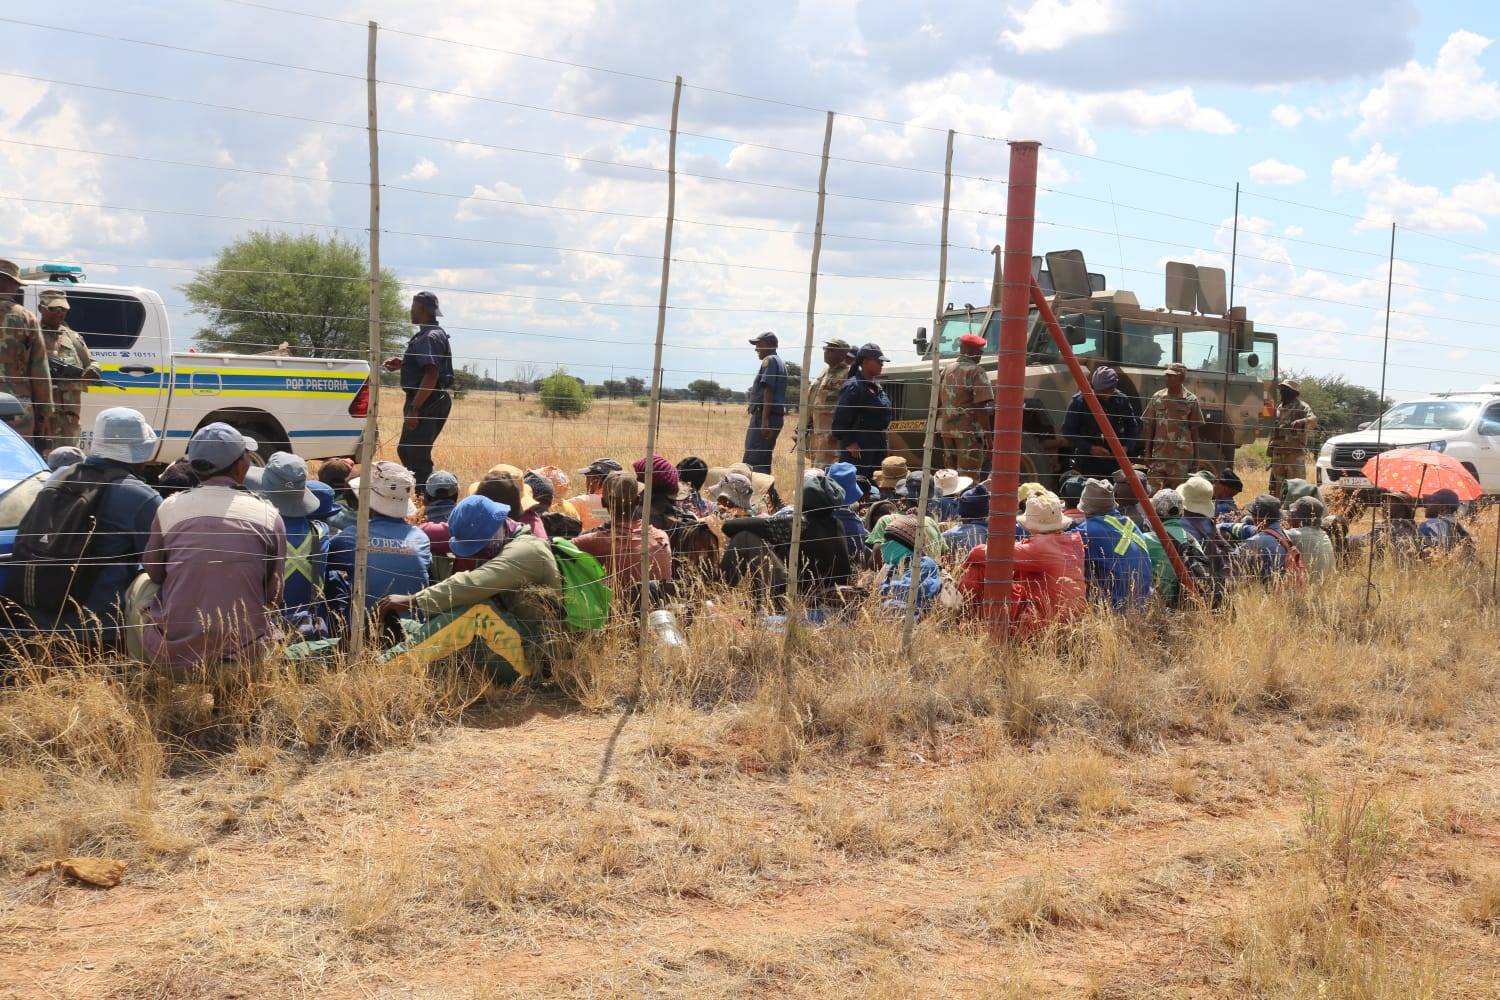 A total of 71 persons were arrested for illegal mining activities on a farm outside Kimberley. 